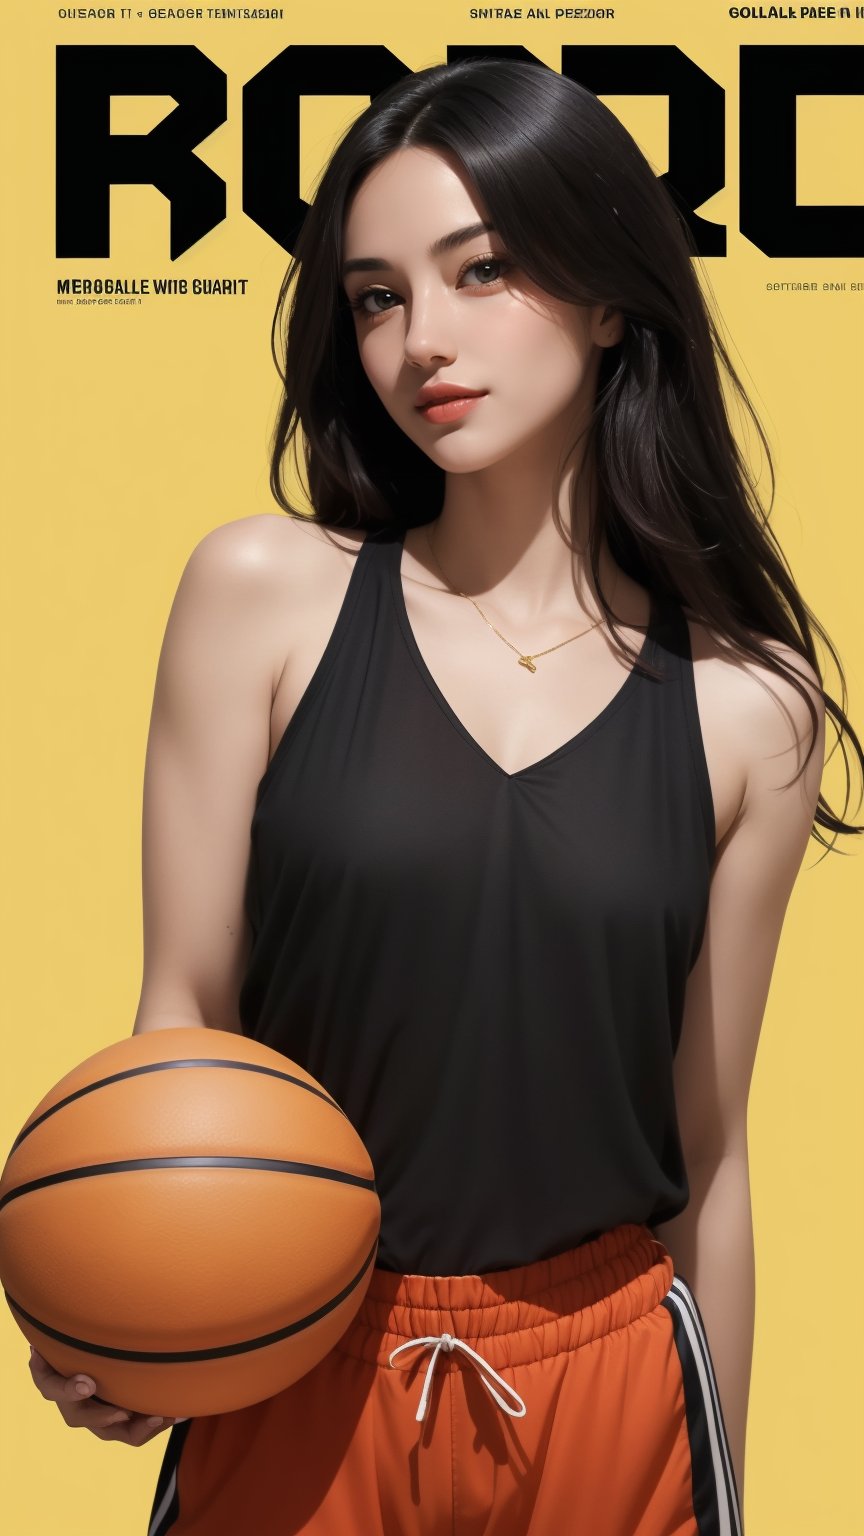 Against a warm, golden background, a stunning young woman with long black hair and confident gaze proudly holds a basketball in one hand. She wears a sleek black top, bold red shorts, and matching socks that add a pop of color to her overall look. Her bright red sneakers seem to radiate energy and enthusiasm. The ultra-realistic paper art masterpiece captures the subject's beauty and youthful spirit with meticulous detail, as if plucked straight from a basketball magazine cover or poster.,((magazine cover)) 